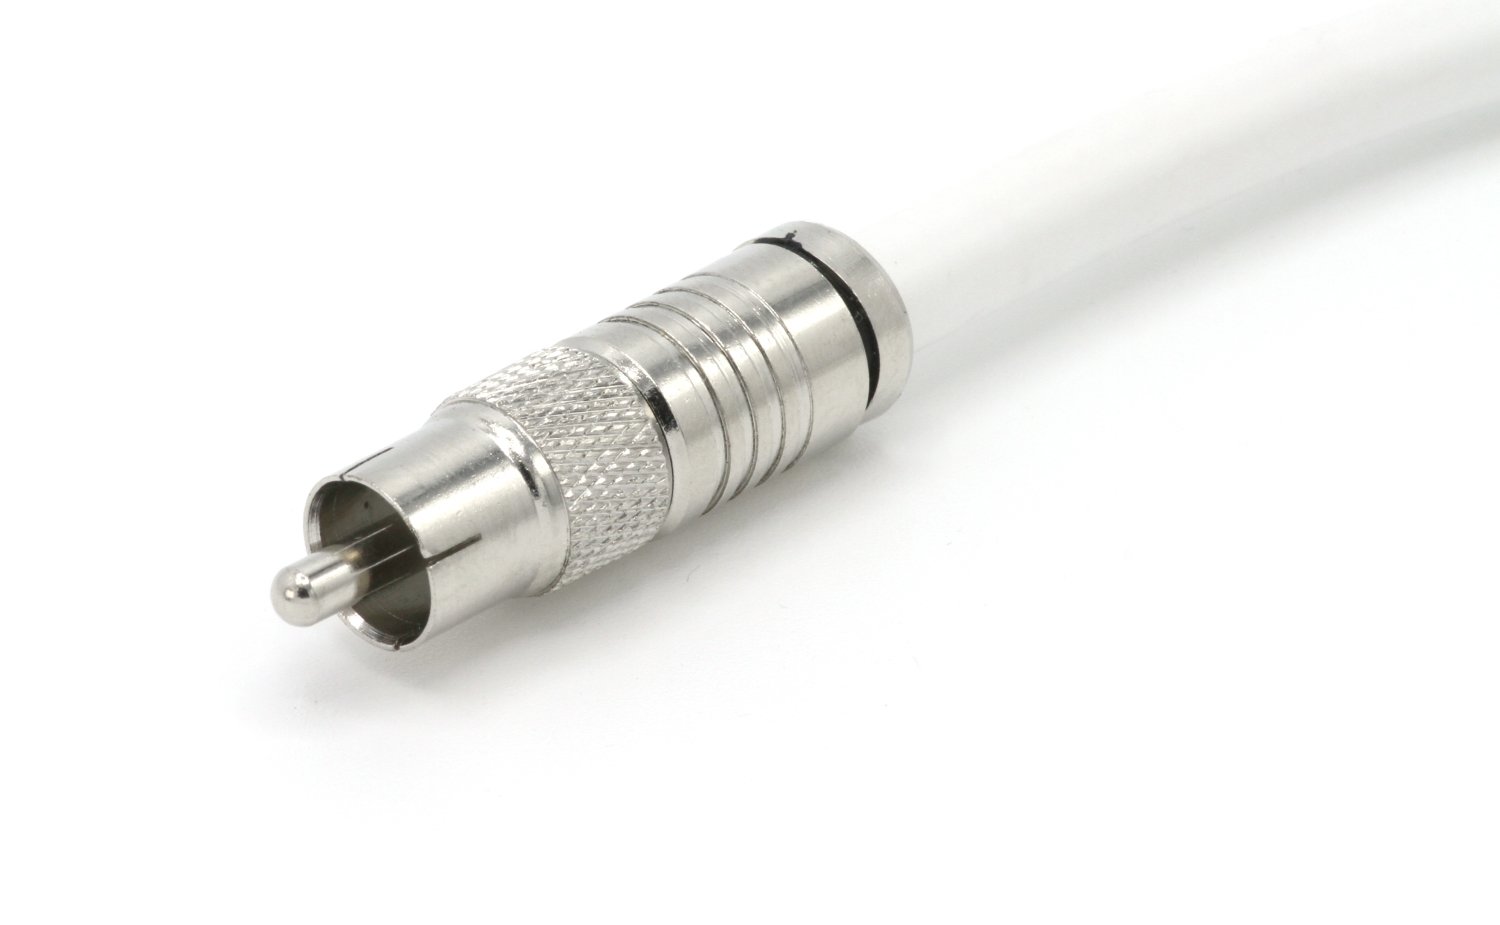 THE CIMPLE CO - White Digital Audio Coaxial Cable Subwoofer Cable - (S/PDIF) RCA Cable, 200 Feet - image 2 of 6